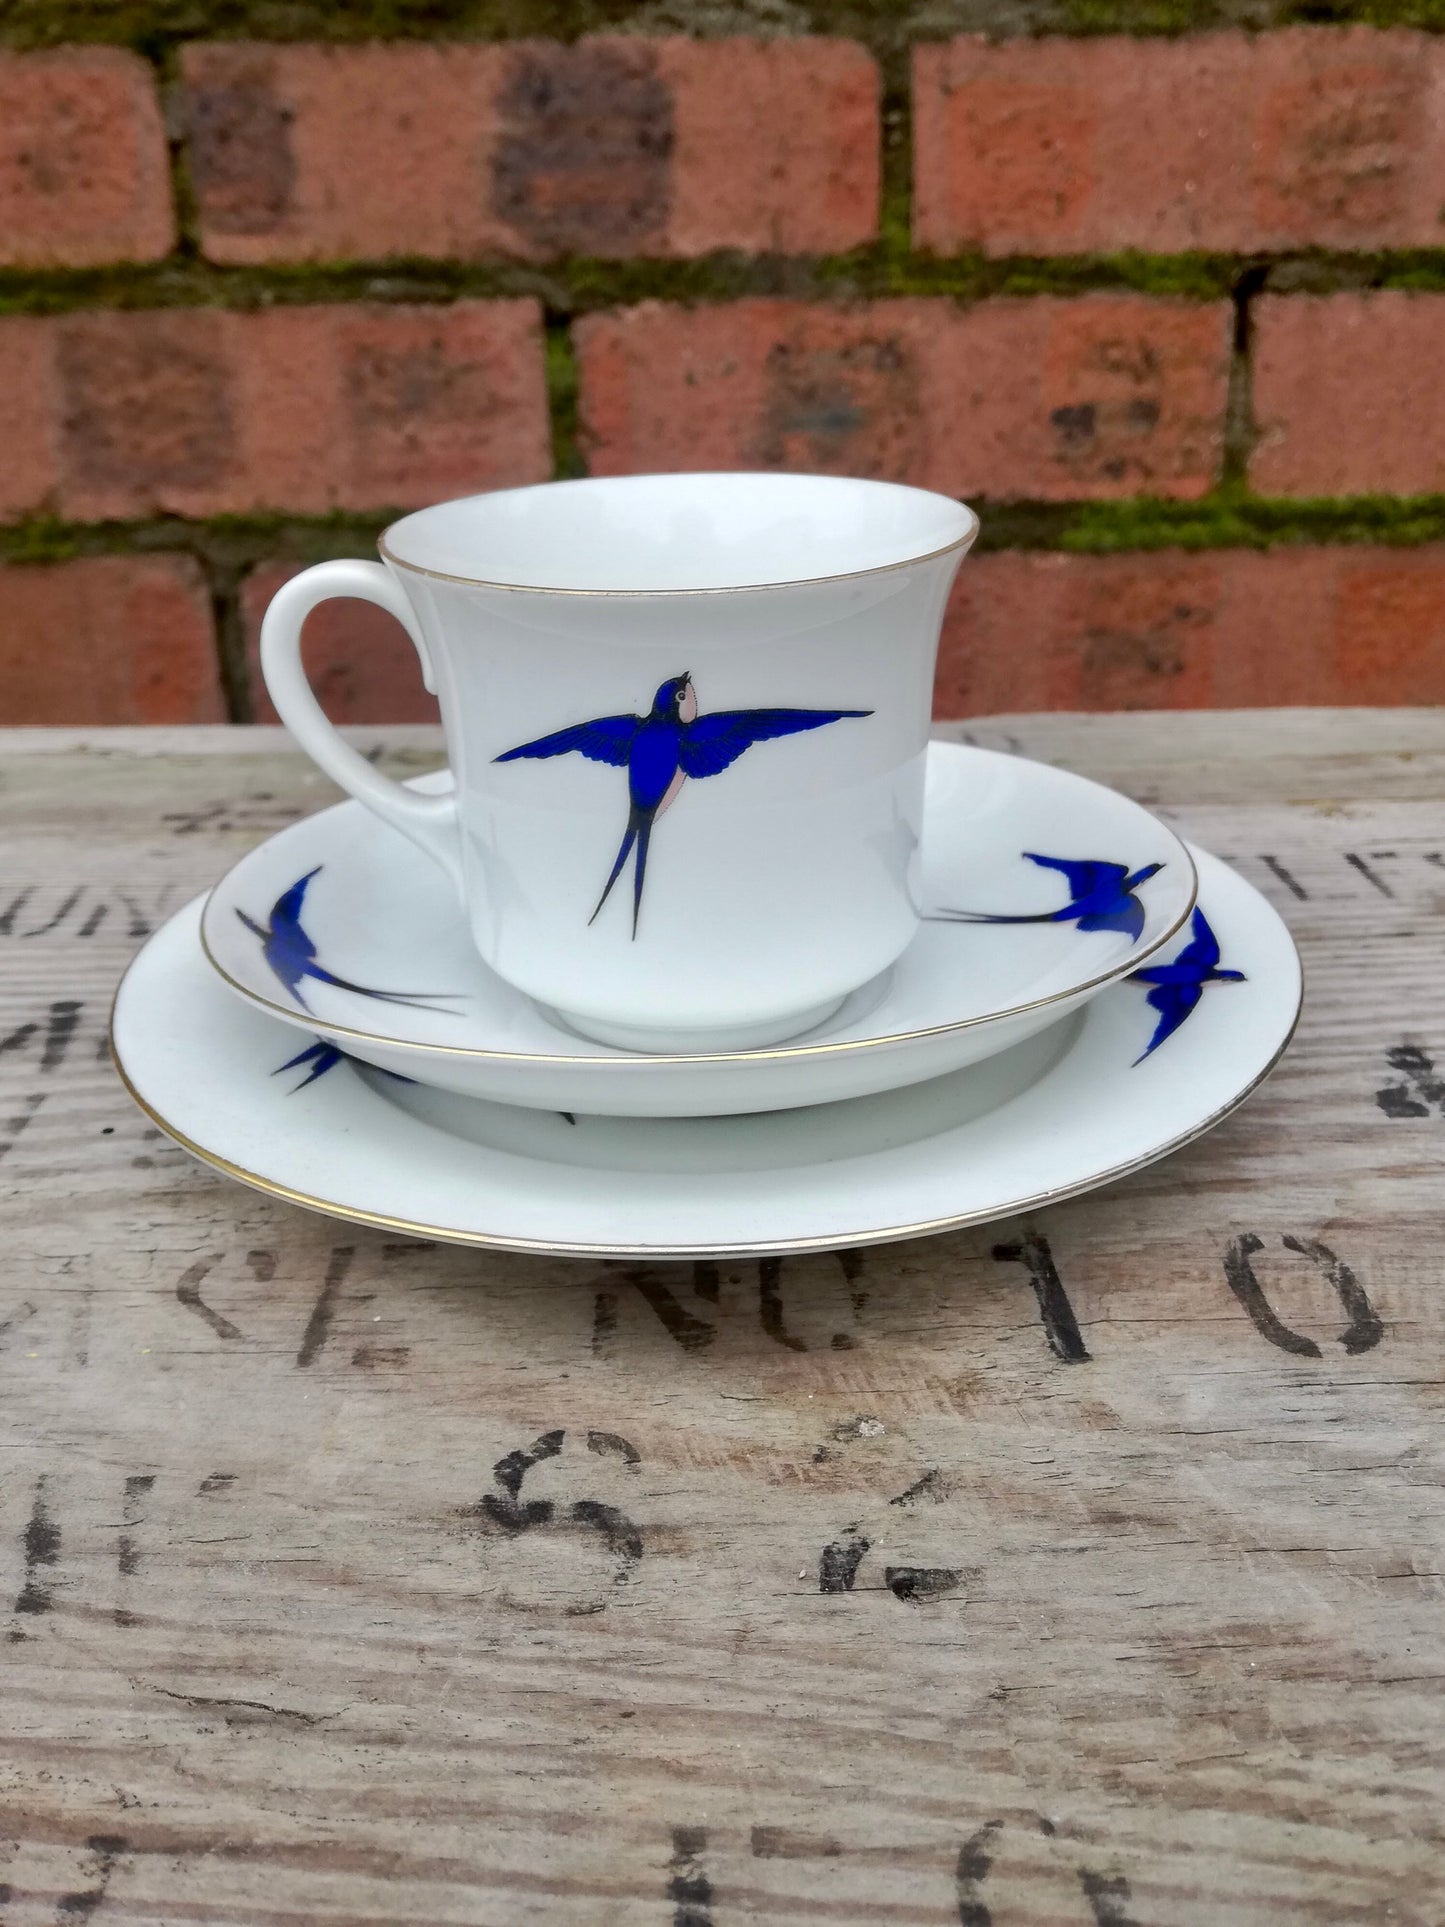 Vintage white swallow design teacup and side plate